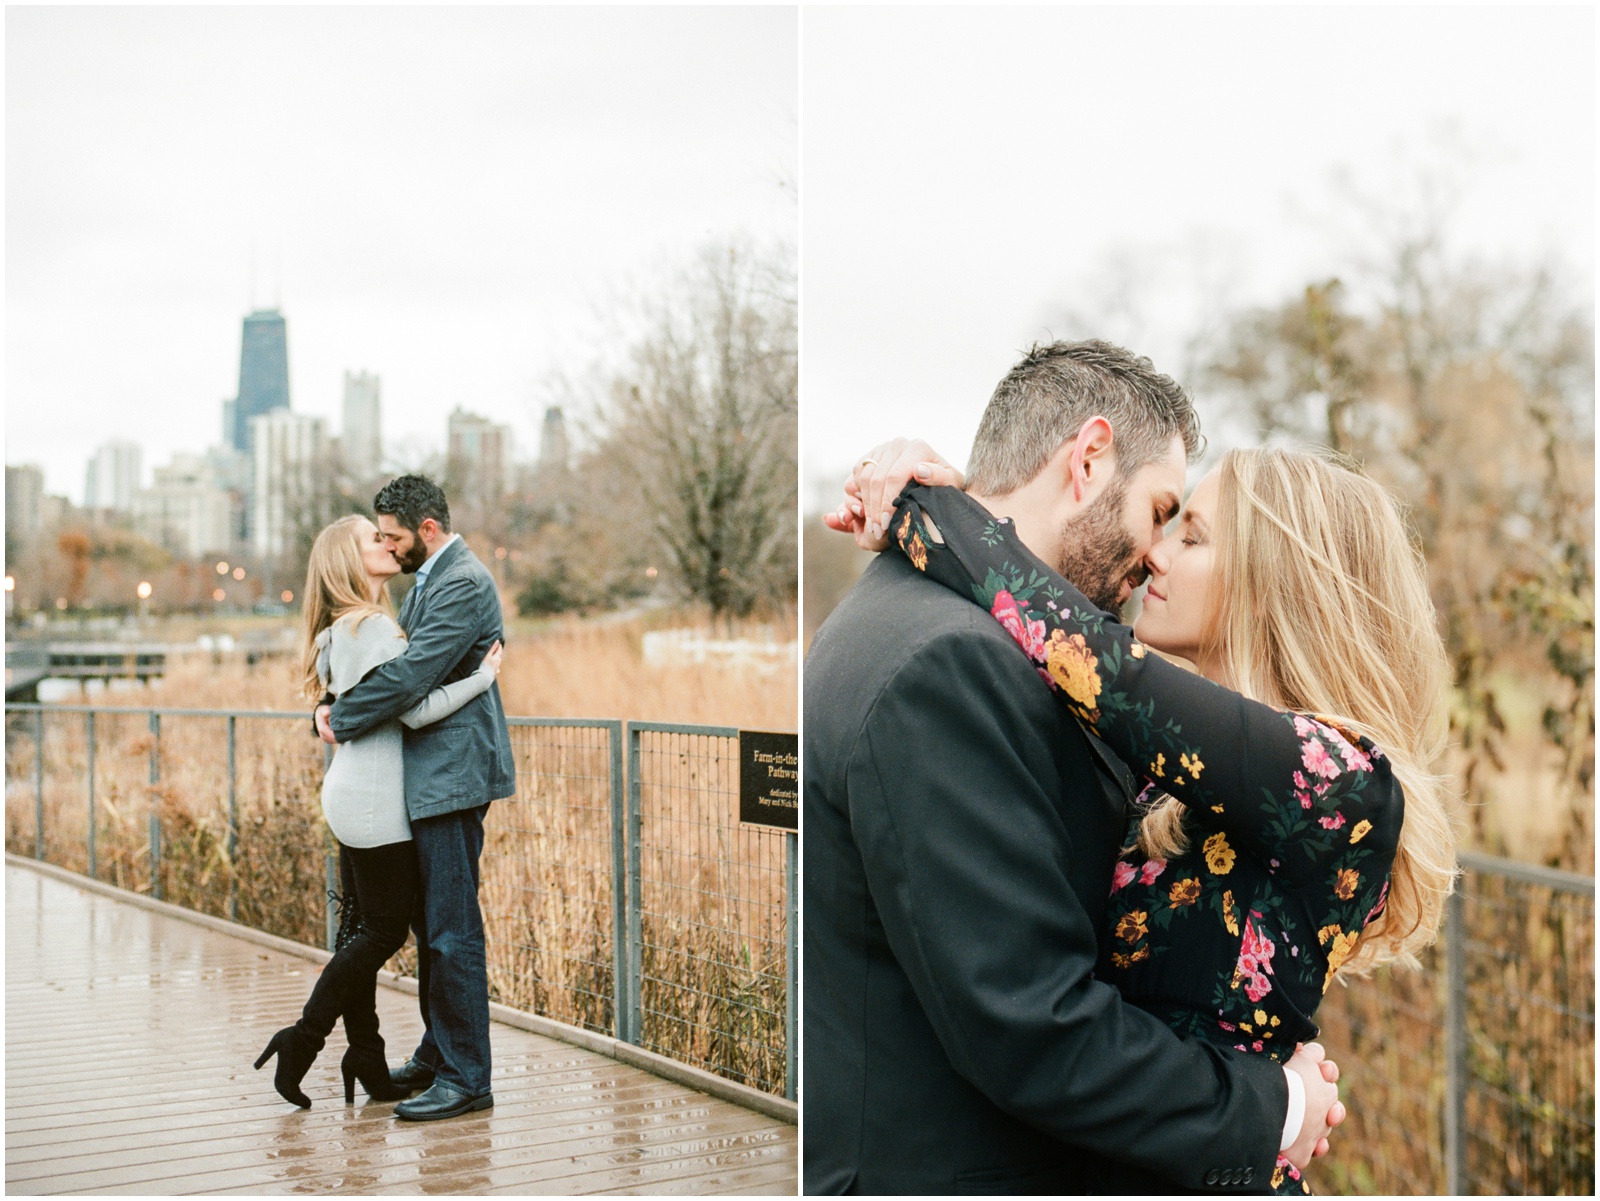 5 Tips for Your Engagement Session: Variety